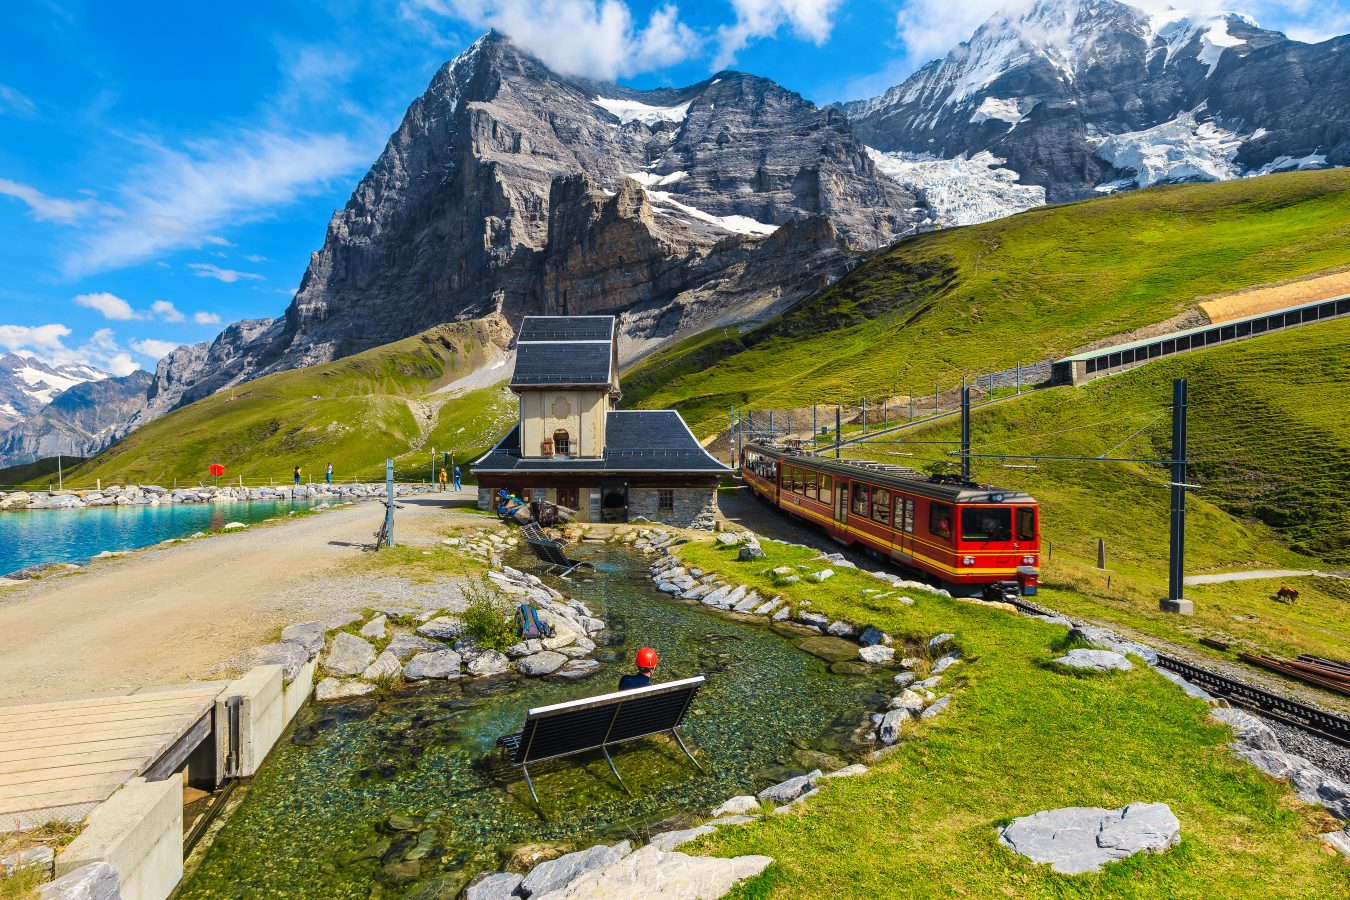 Cogwheel red passenger train in the small mountain station on the shore of the Fallbodensee lake, Jungfraujoch, Bernese Oberland, Switzerland, Europe.